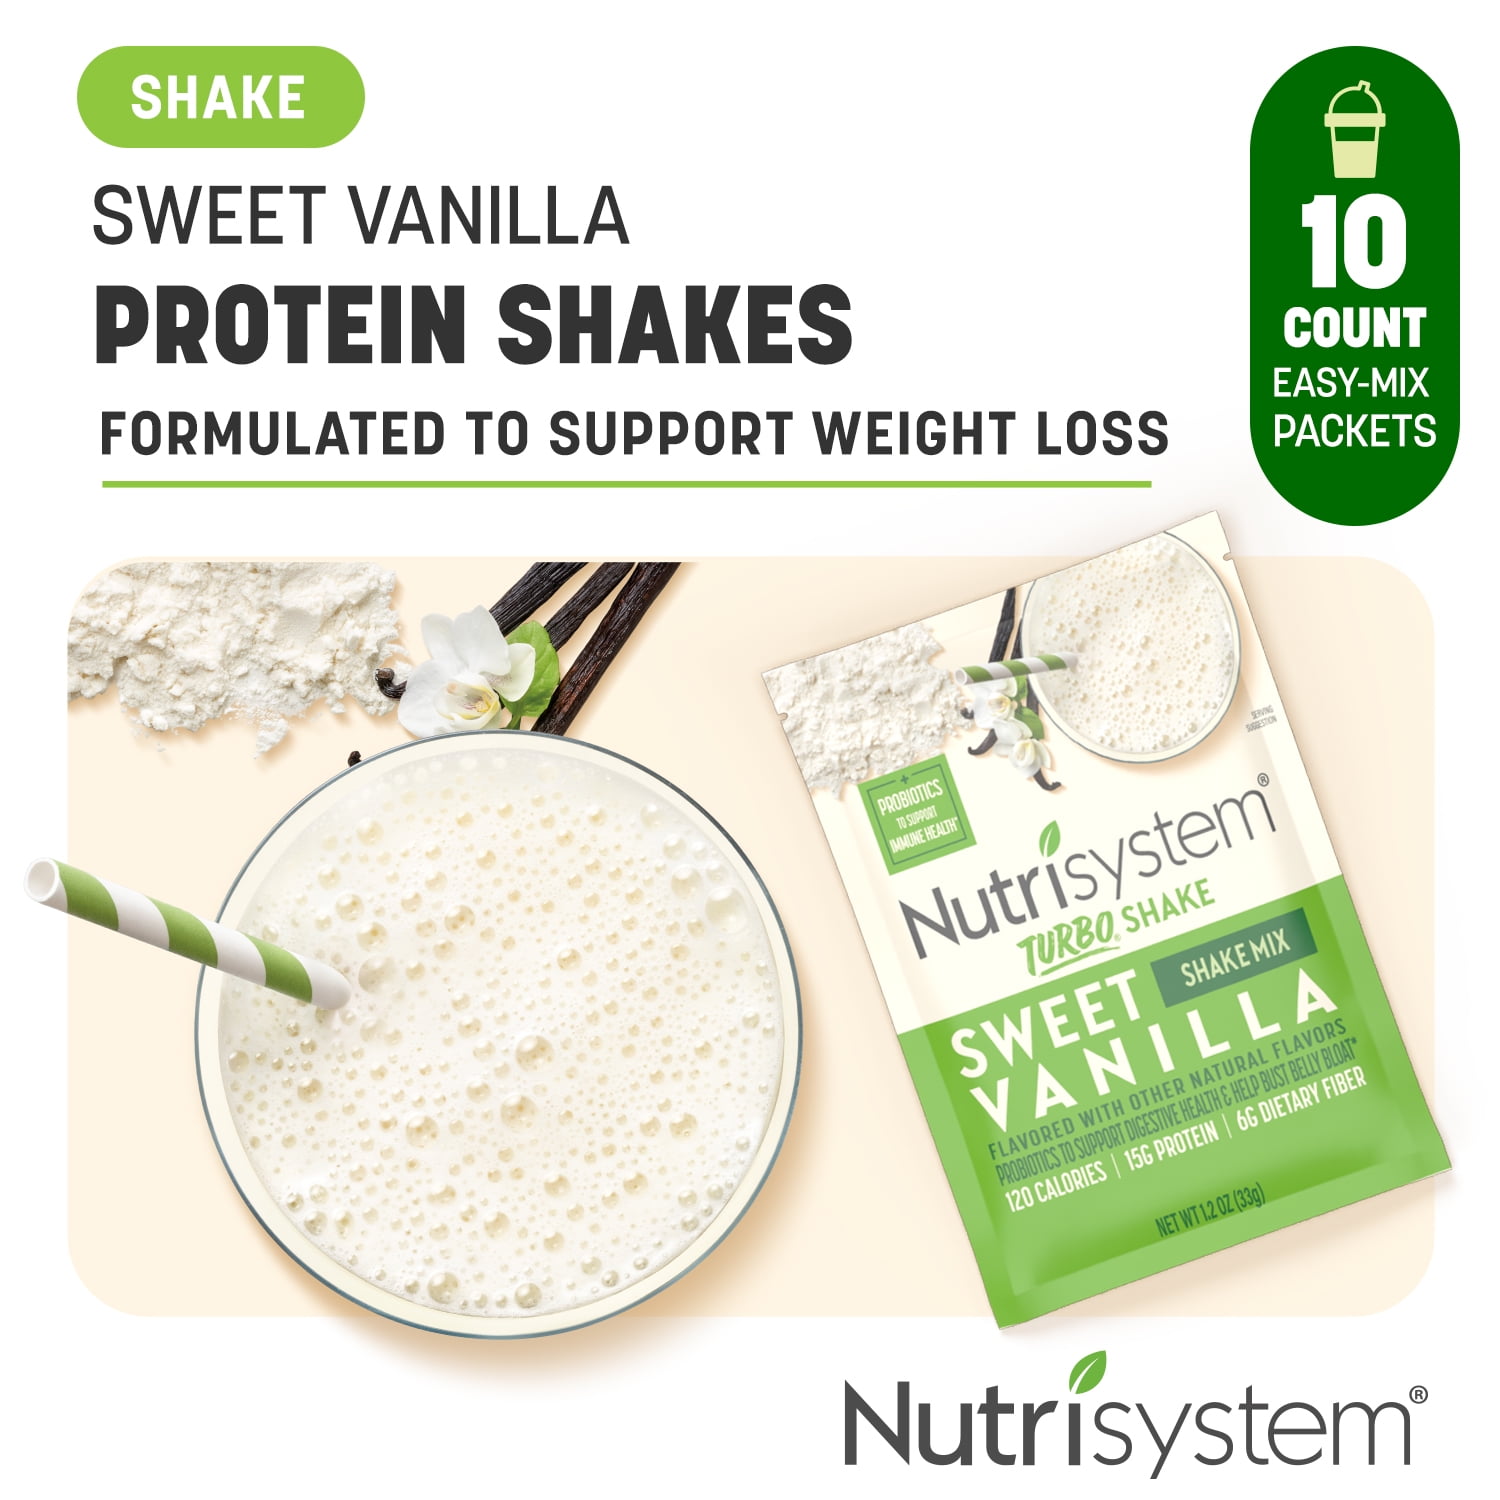 Nutrisystem launches new line of shakes, 2016-03-01